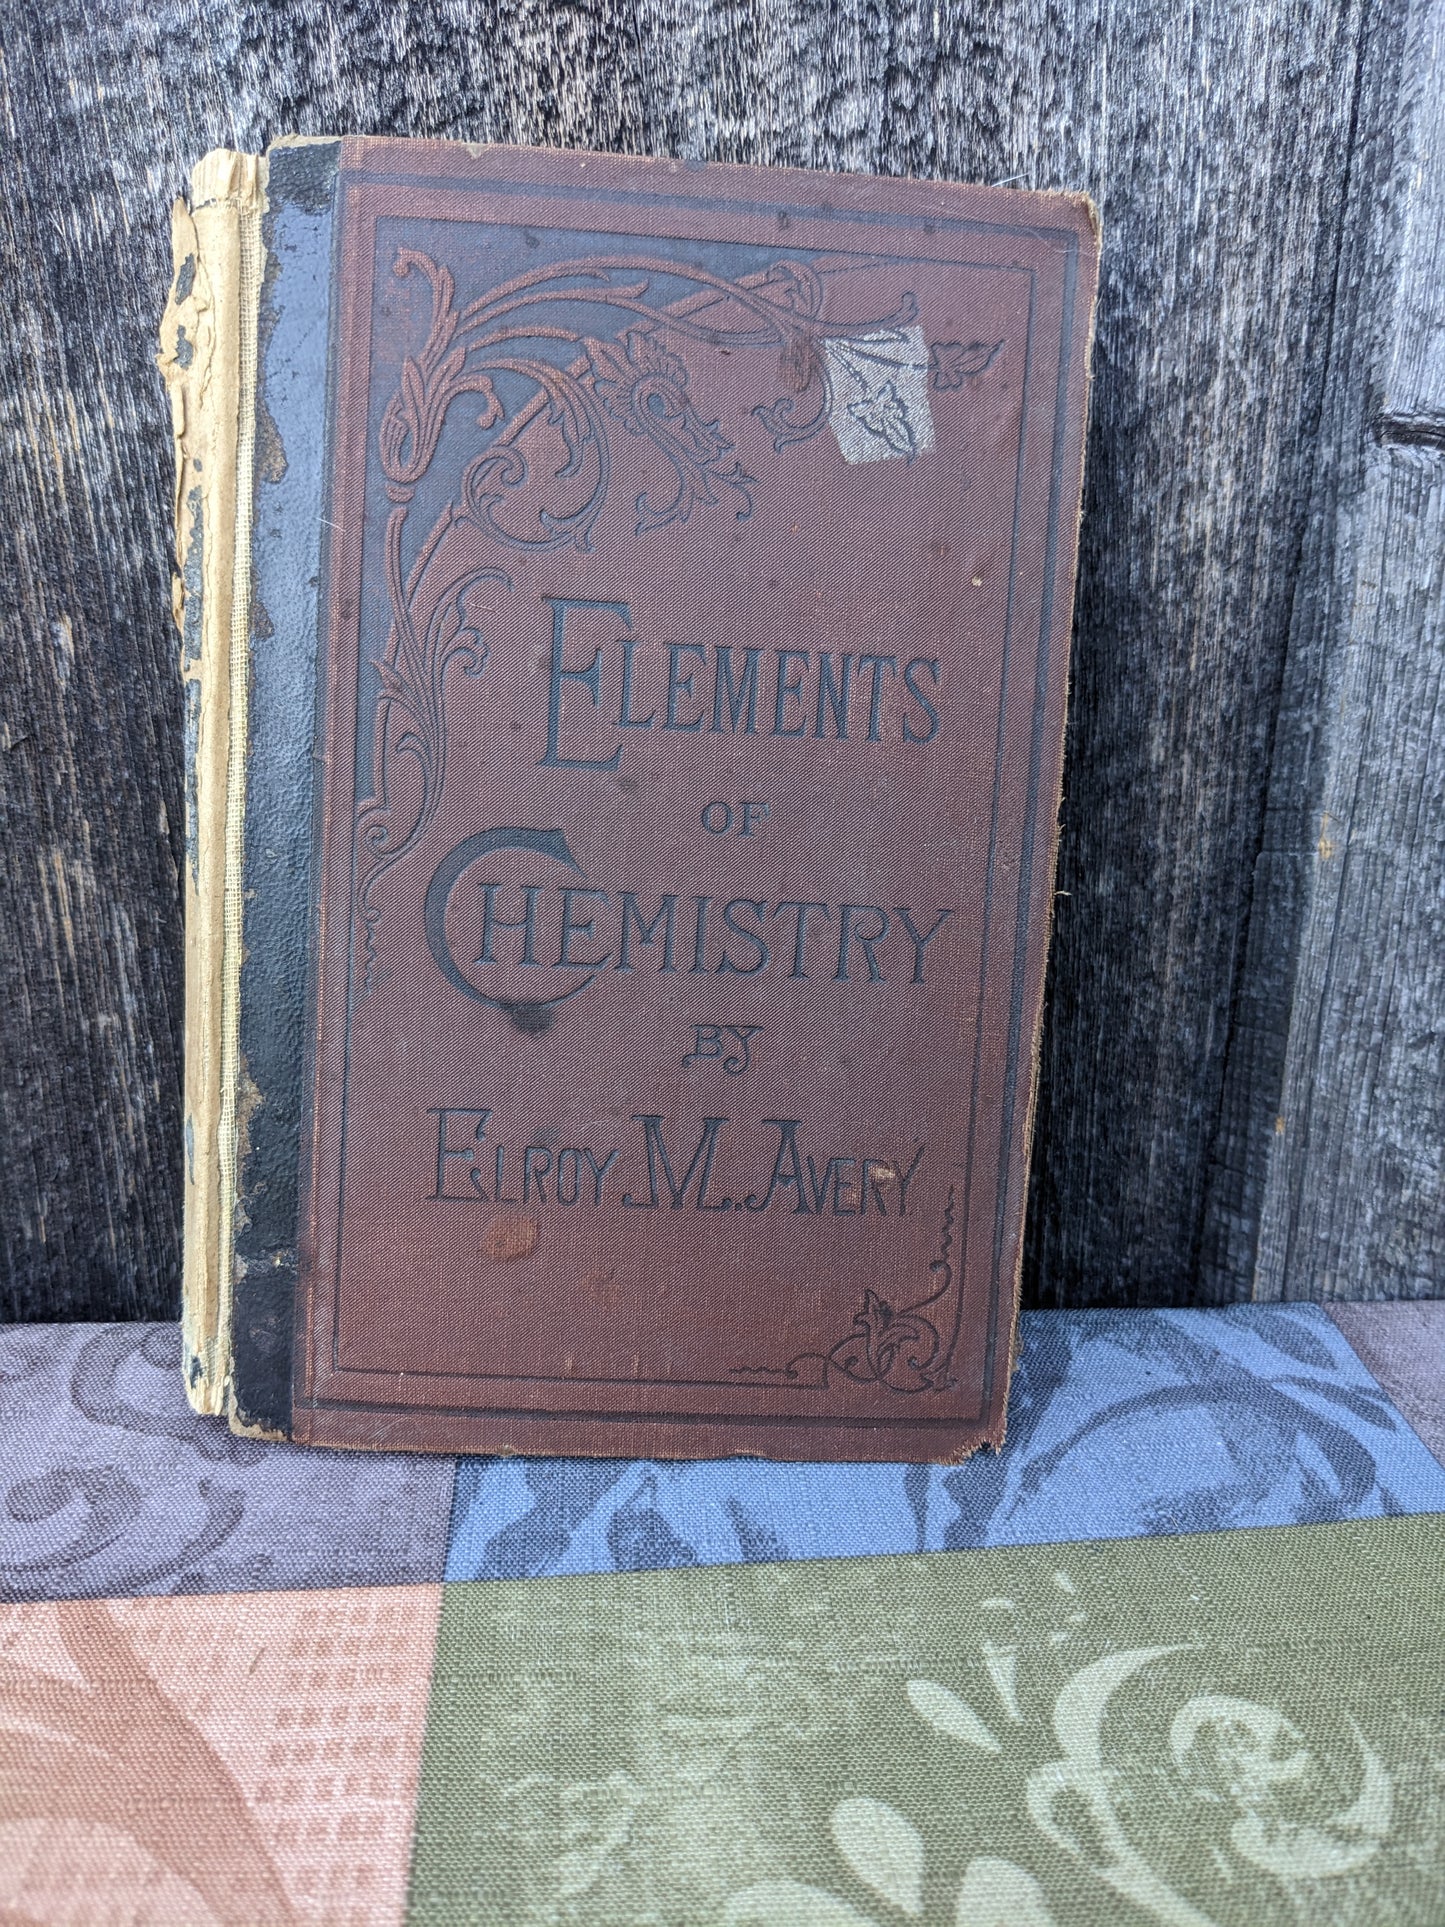 Elements of  Chemistry, A Textbook for Schools, by Elroy Avery, 1886 edition